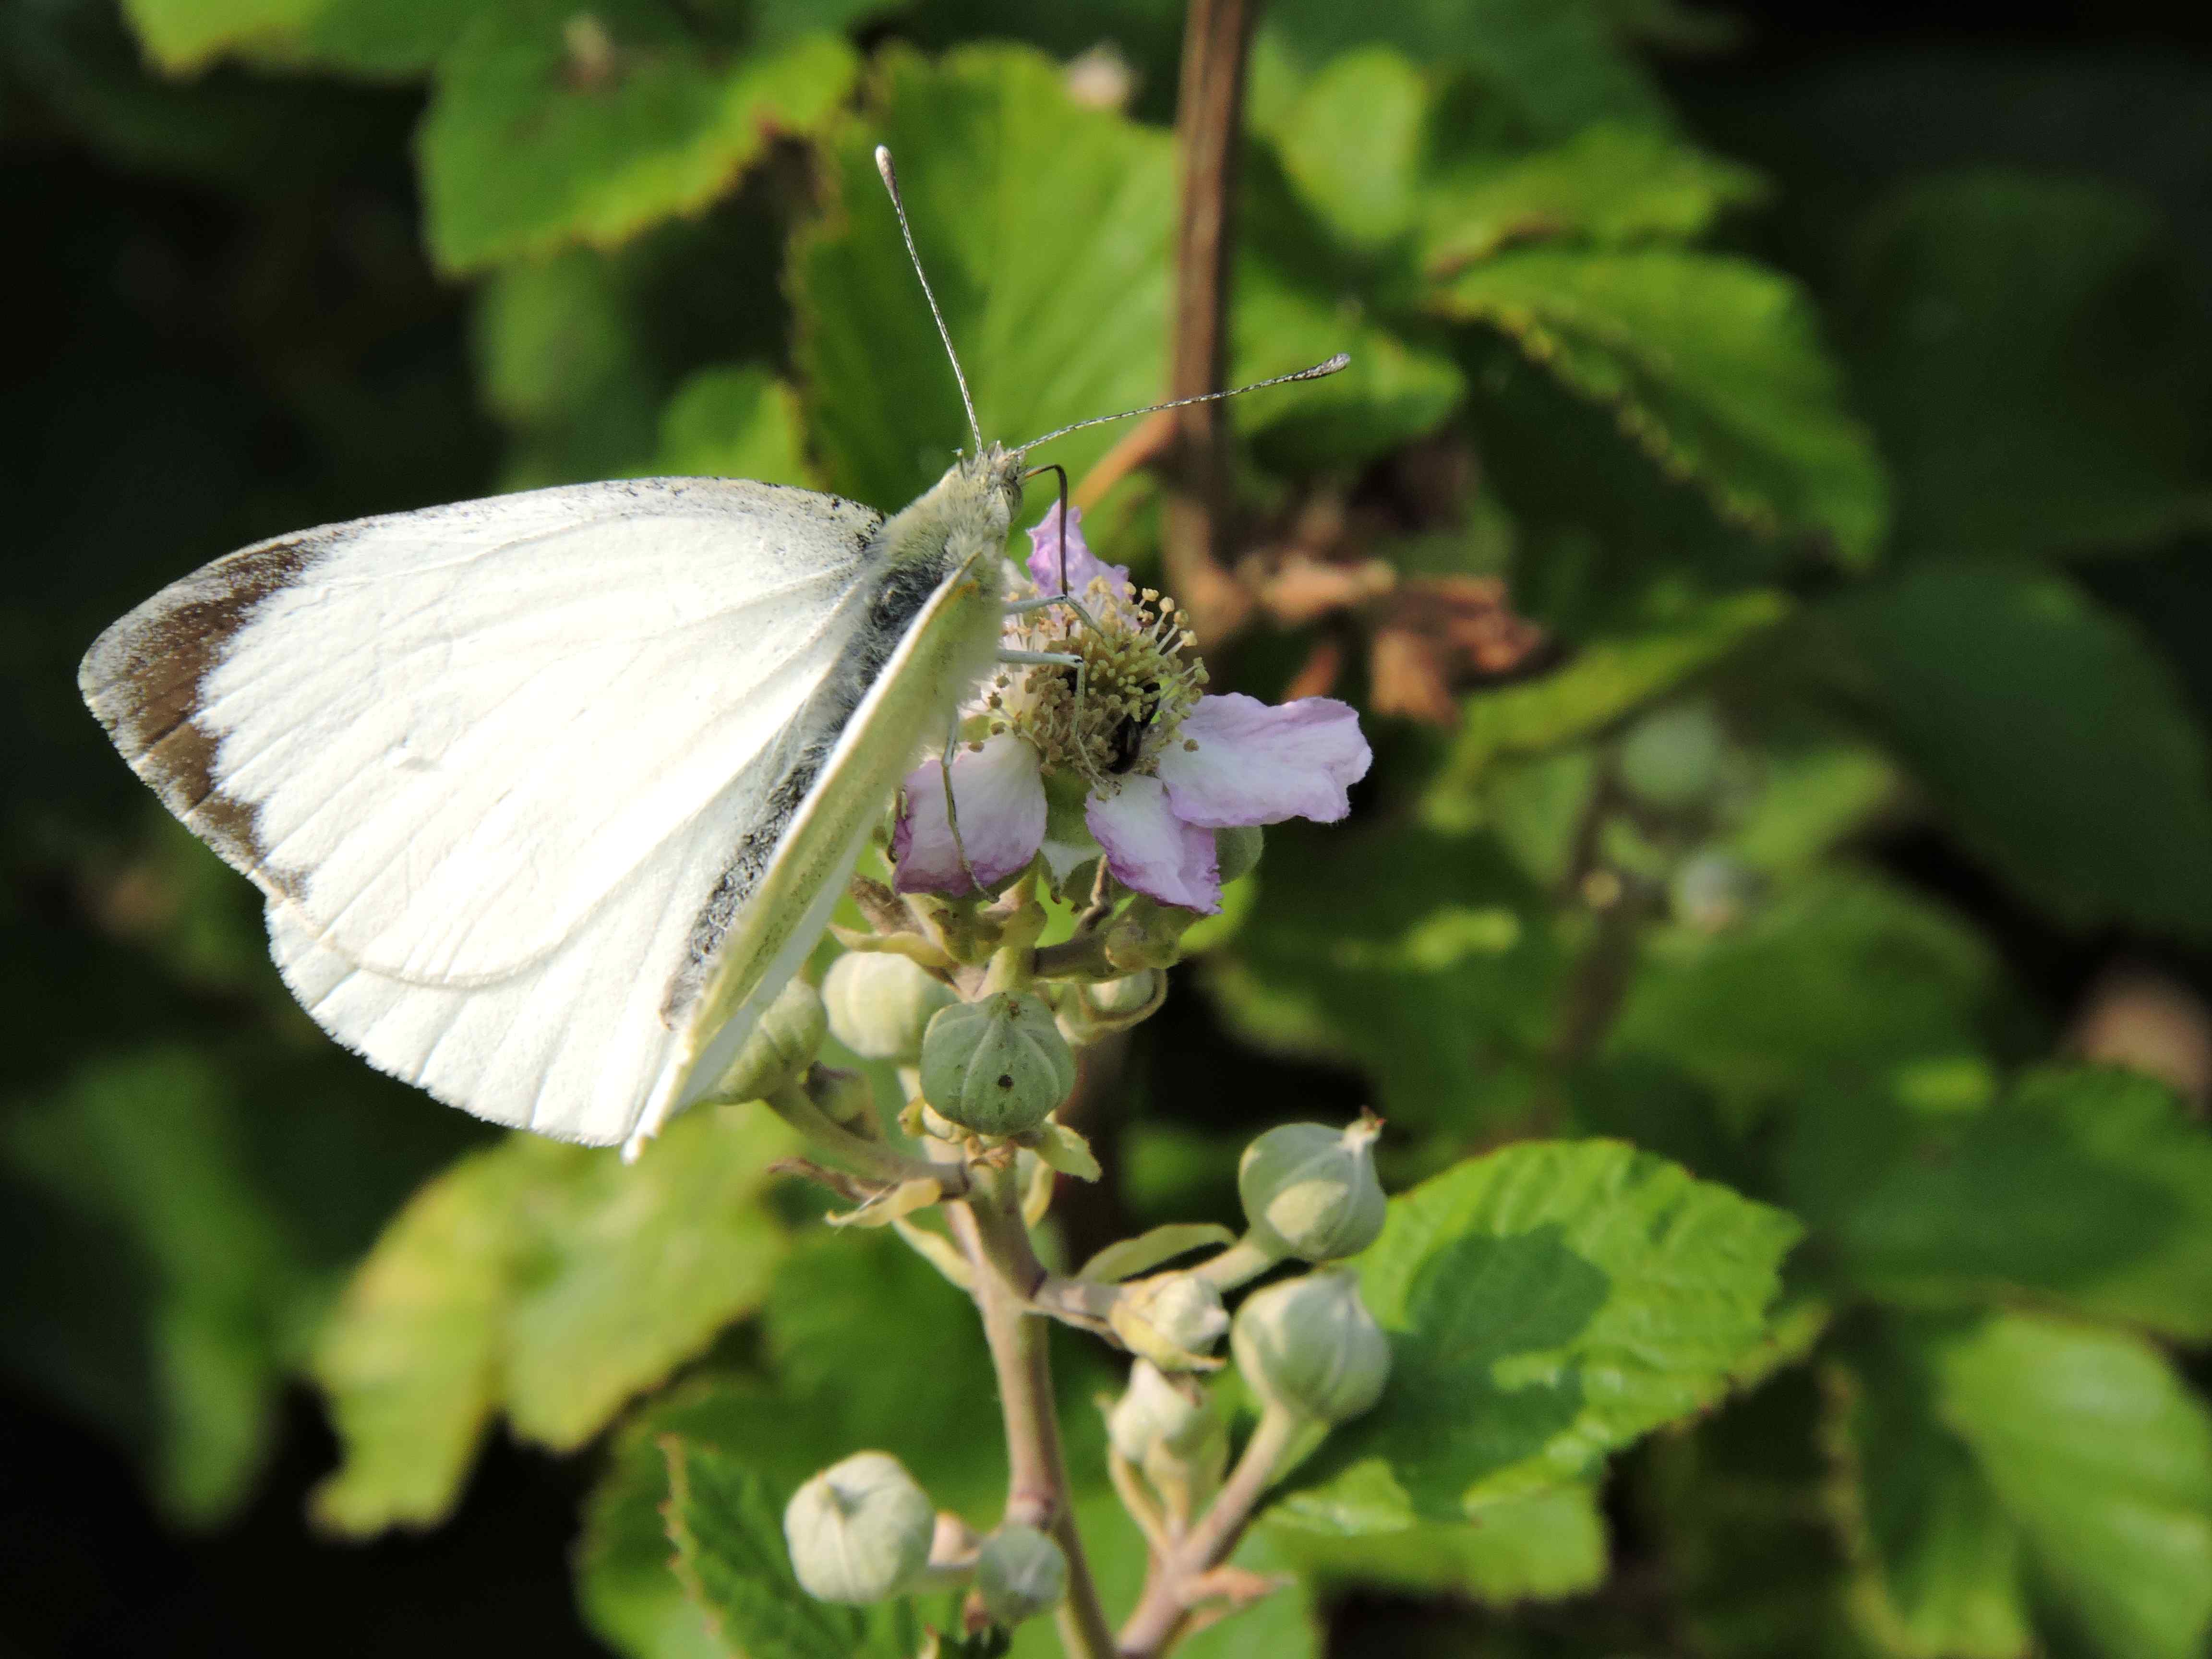 The largest of the Whites, in fact one of the UK's largest butterflies